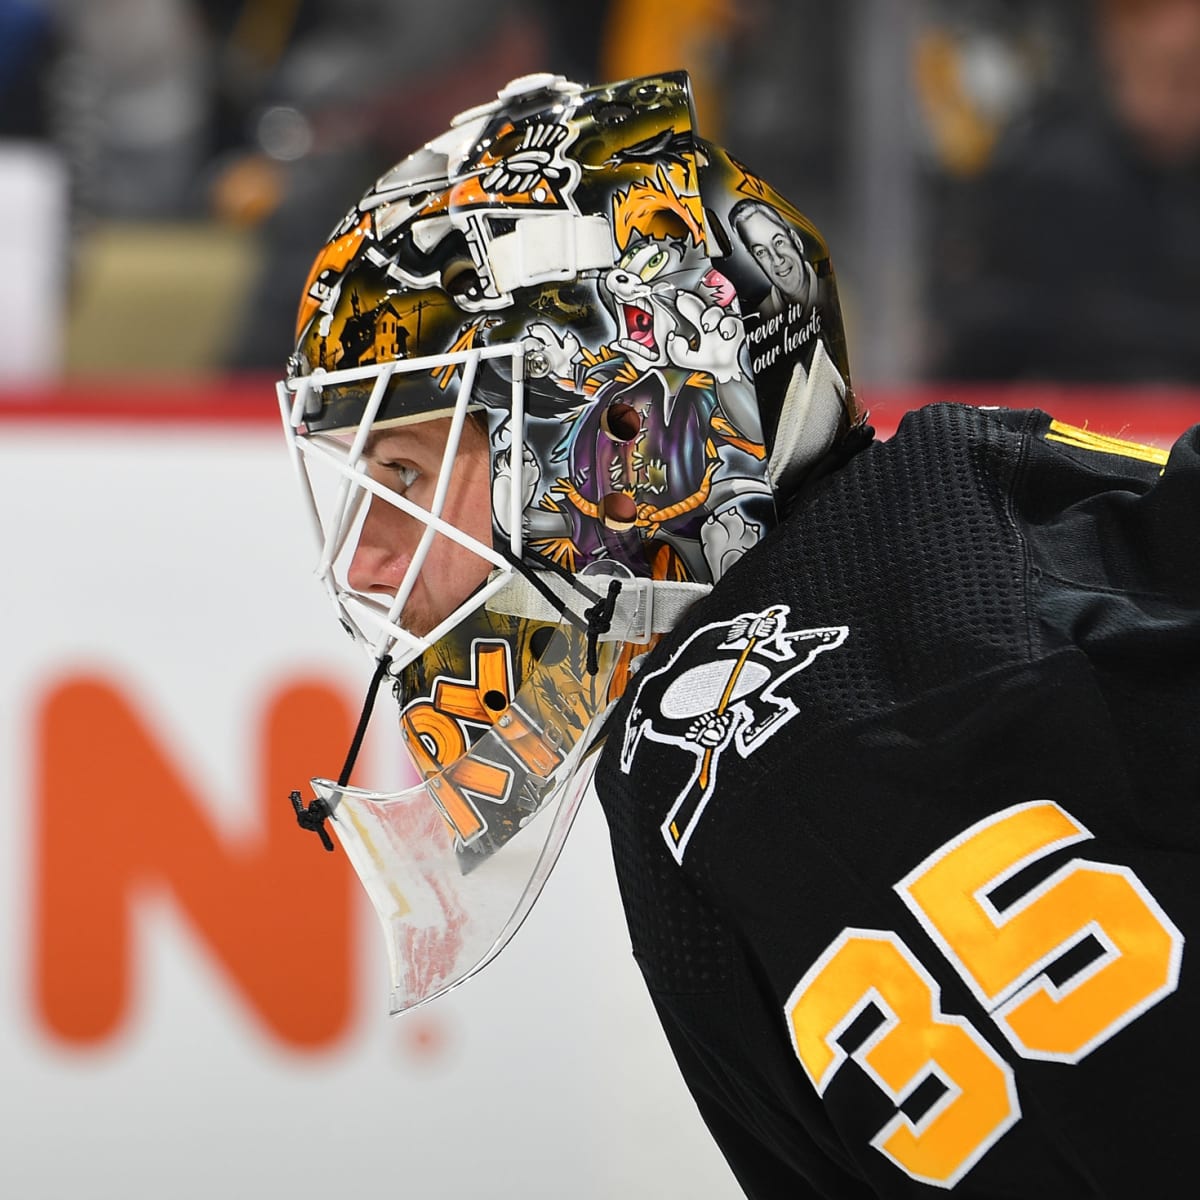 Penguins' goalie Jarry intends to learn from playoff woes, National Sports